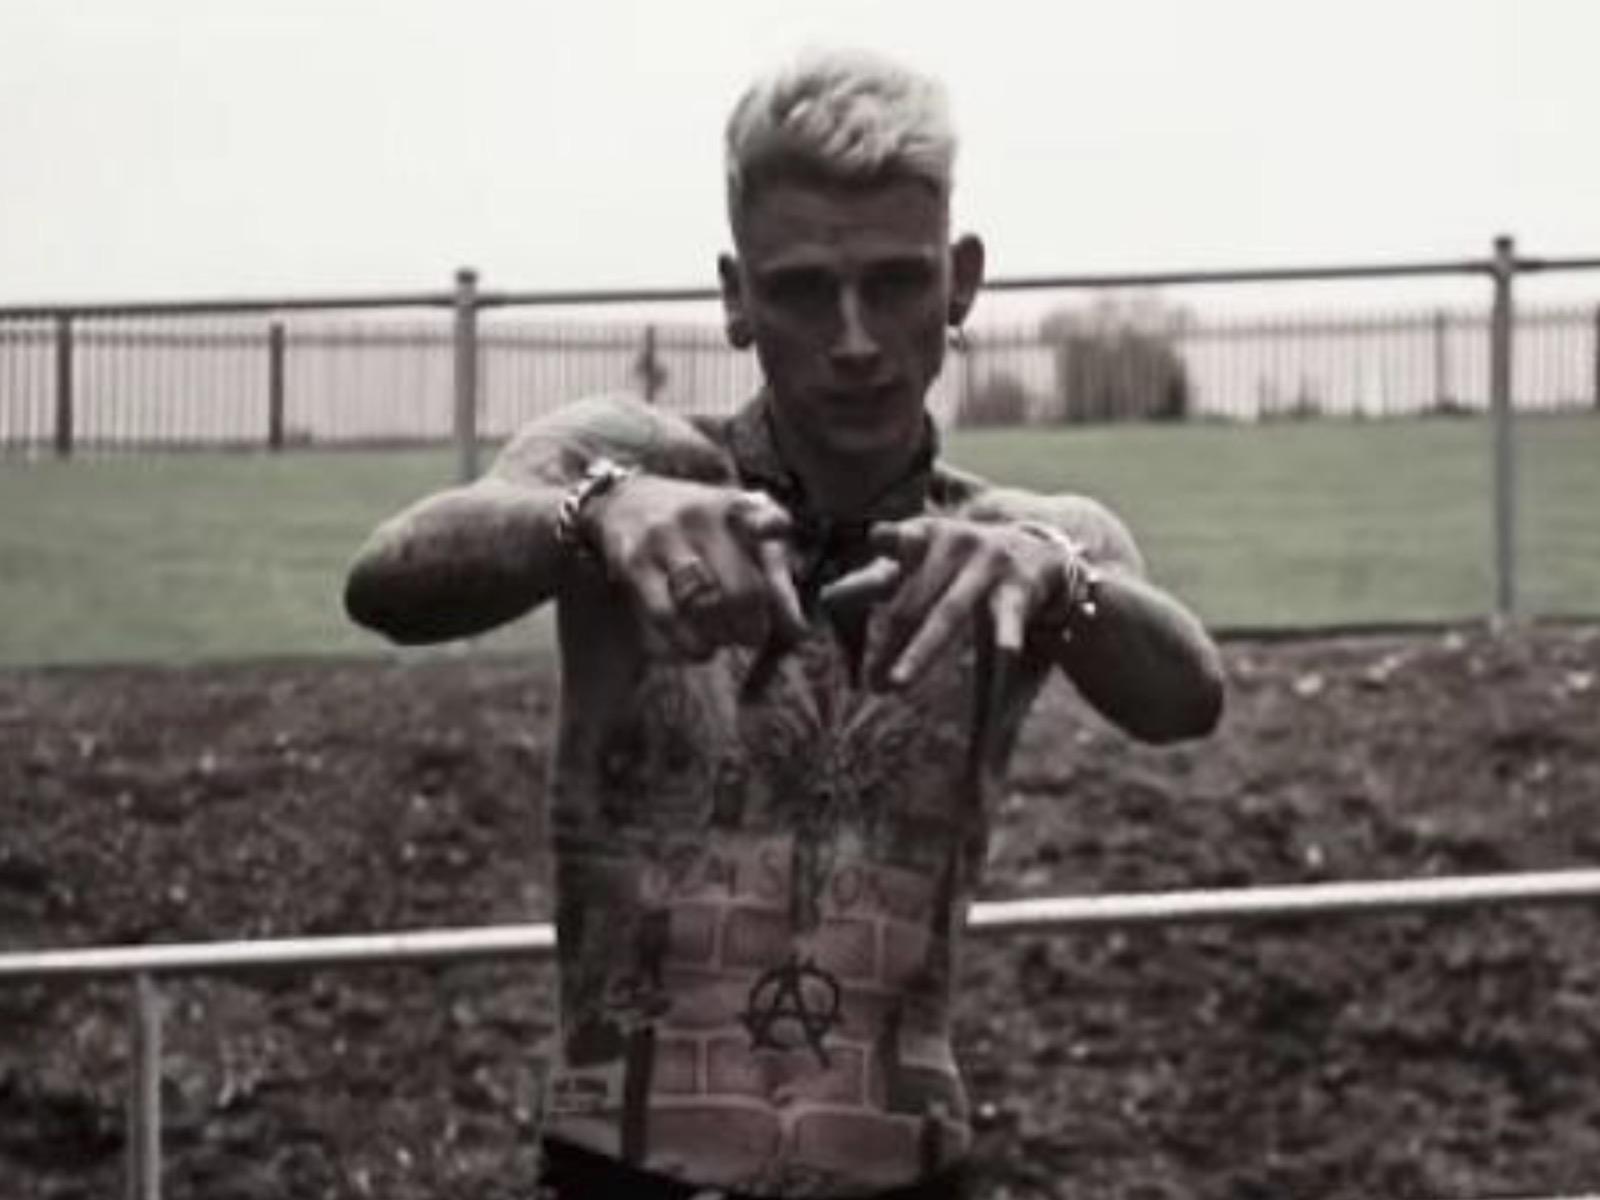 Machine Gun Kelly Disses Eminem To Close Out 2018: Just To Piss Y